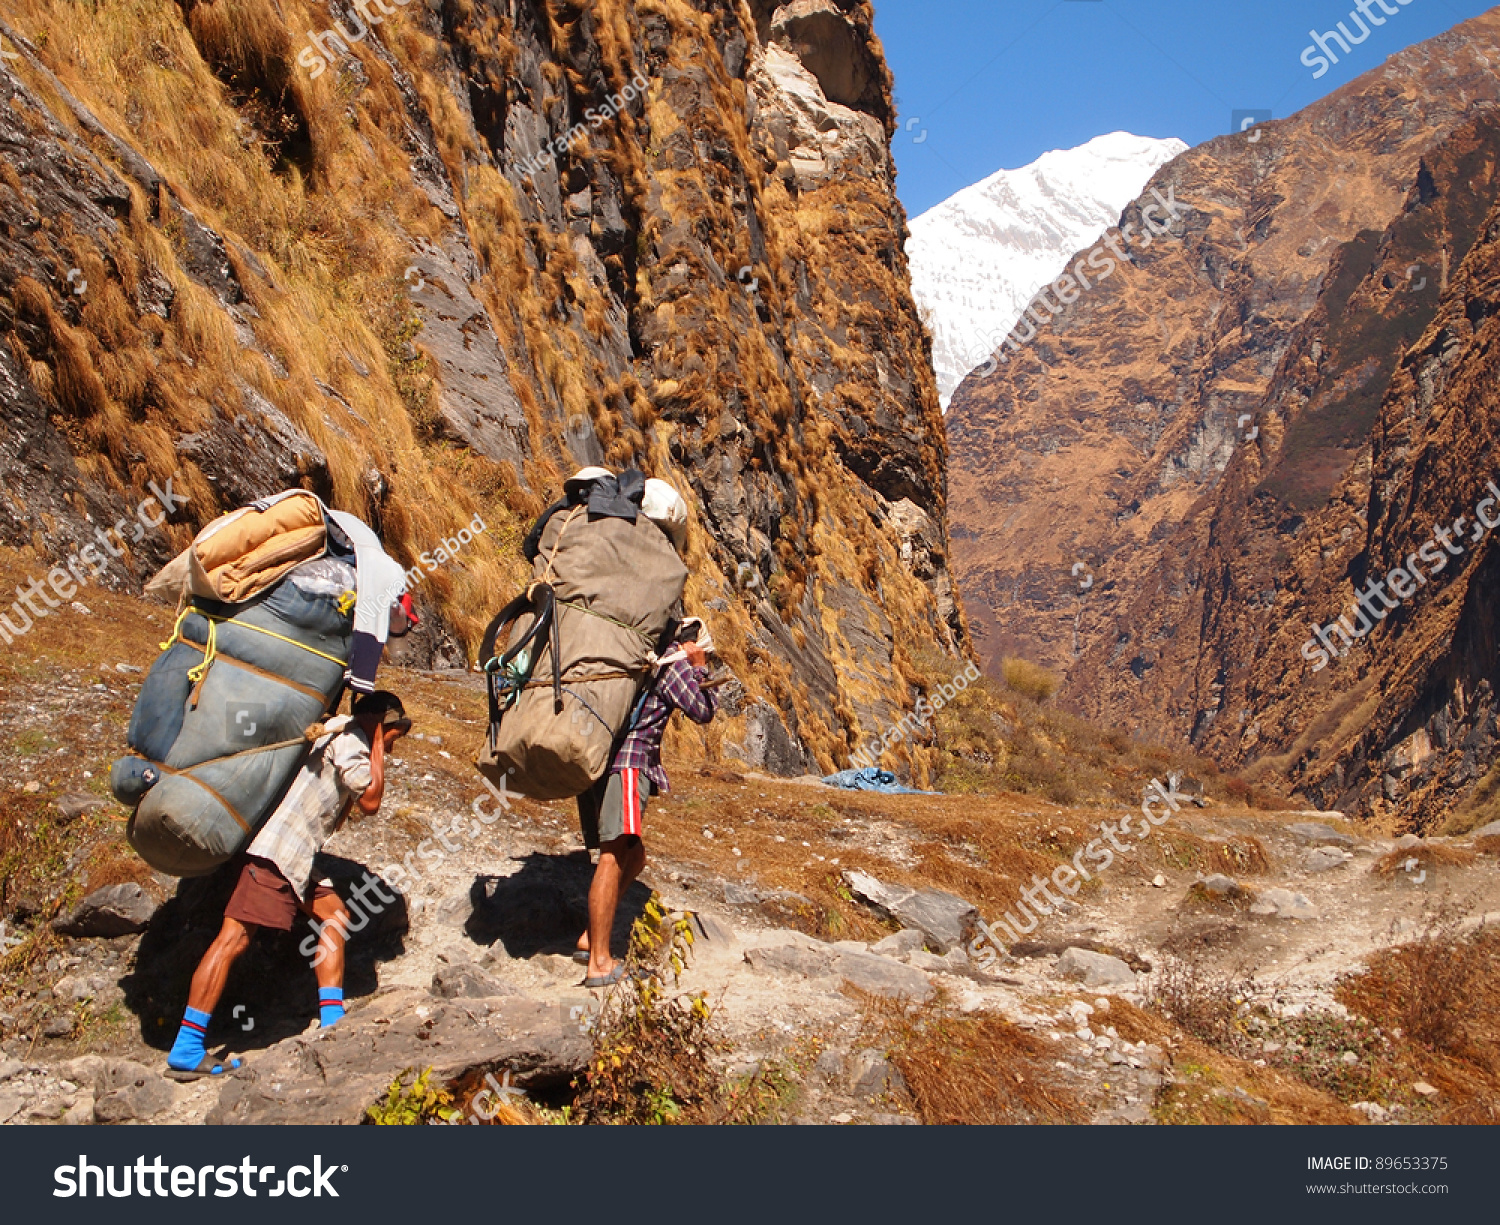 stock-photo-annapurna-nepal-porters-carrying-heavy-load-on-his-back-89653375.jpg